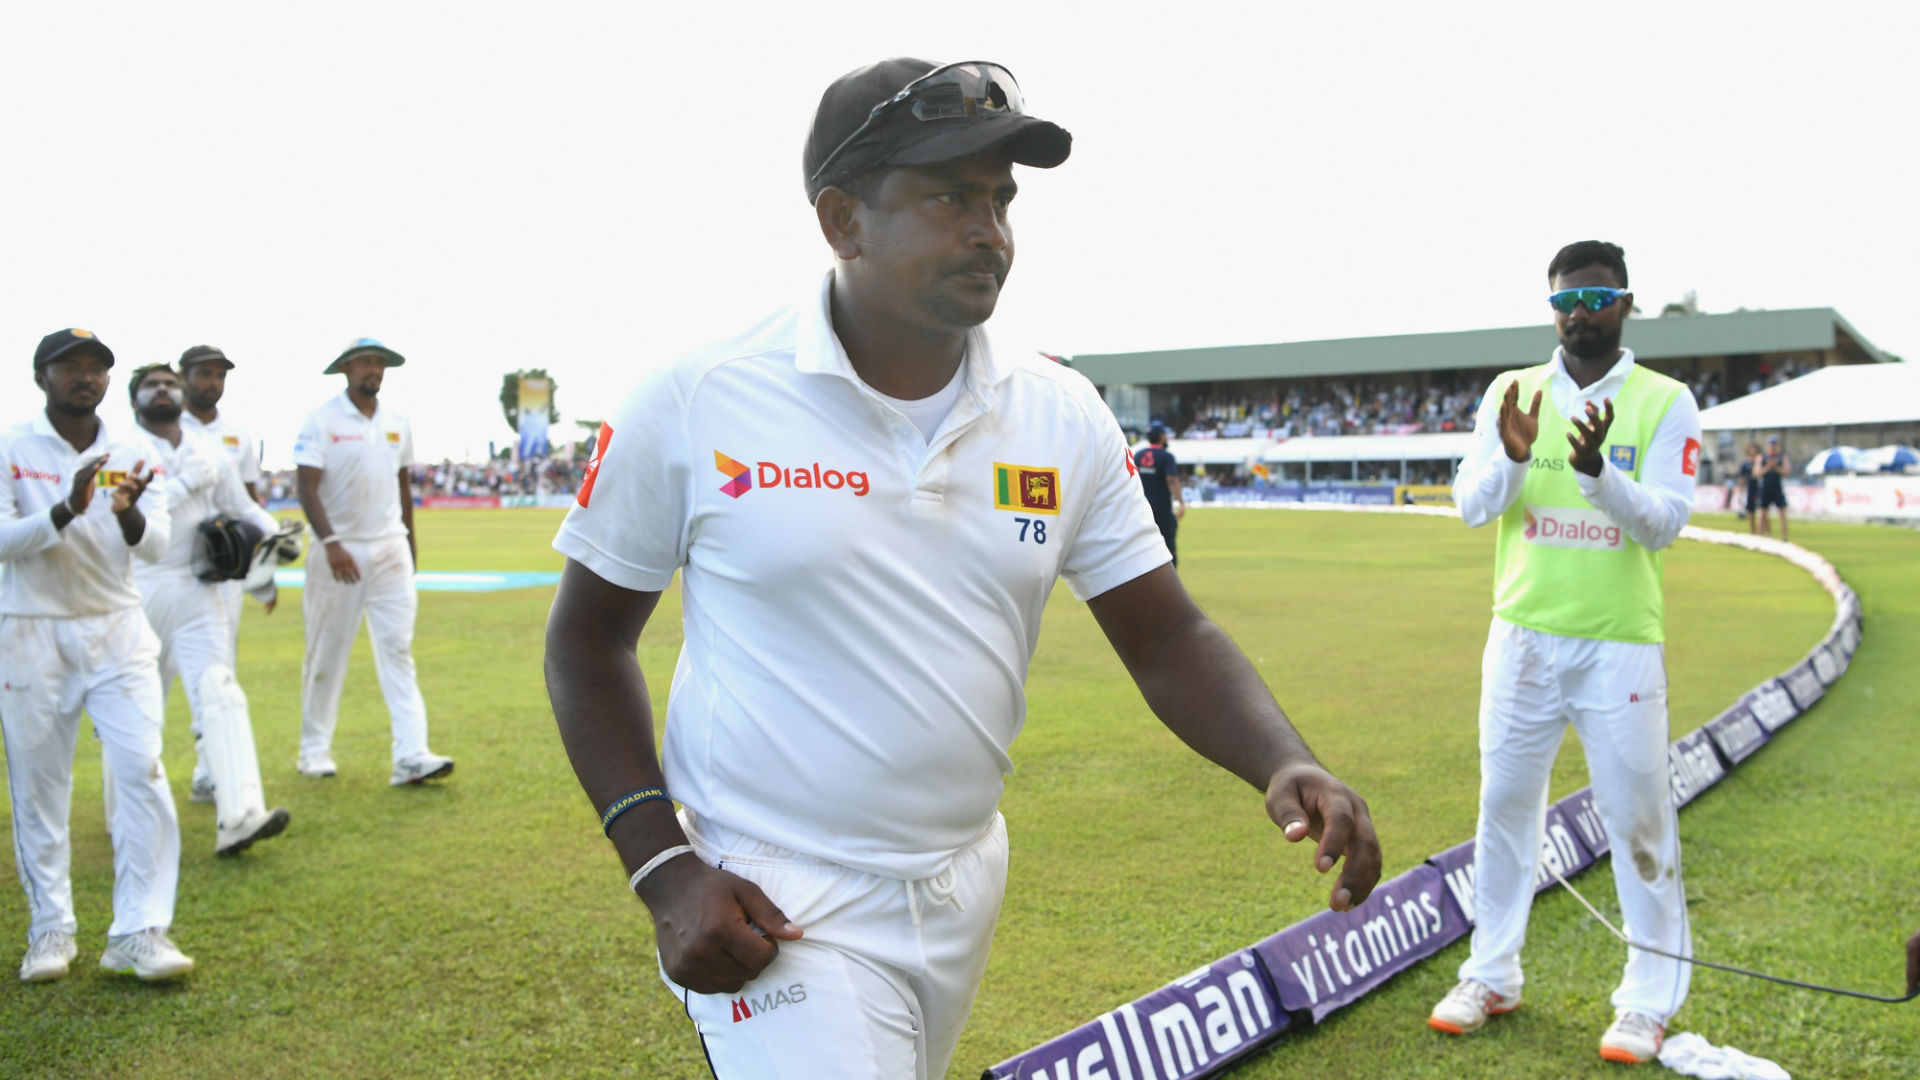 Three wickets in his final Test match for Sri Lanka saw Rangana Herath nudge further up the wicket standings.